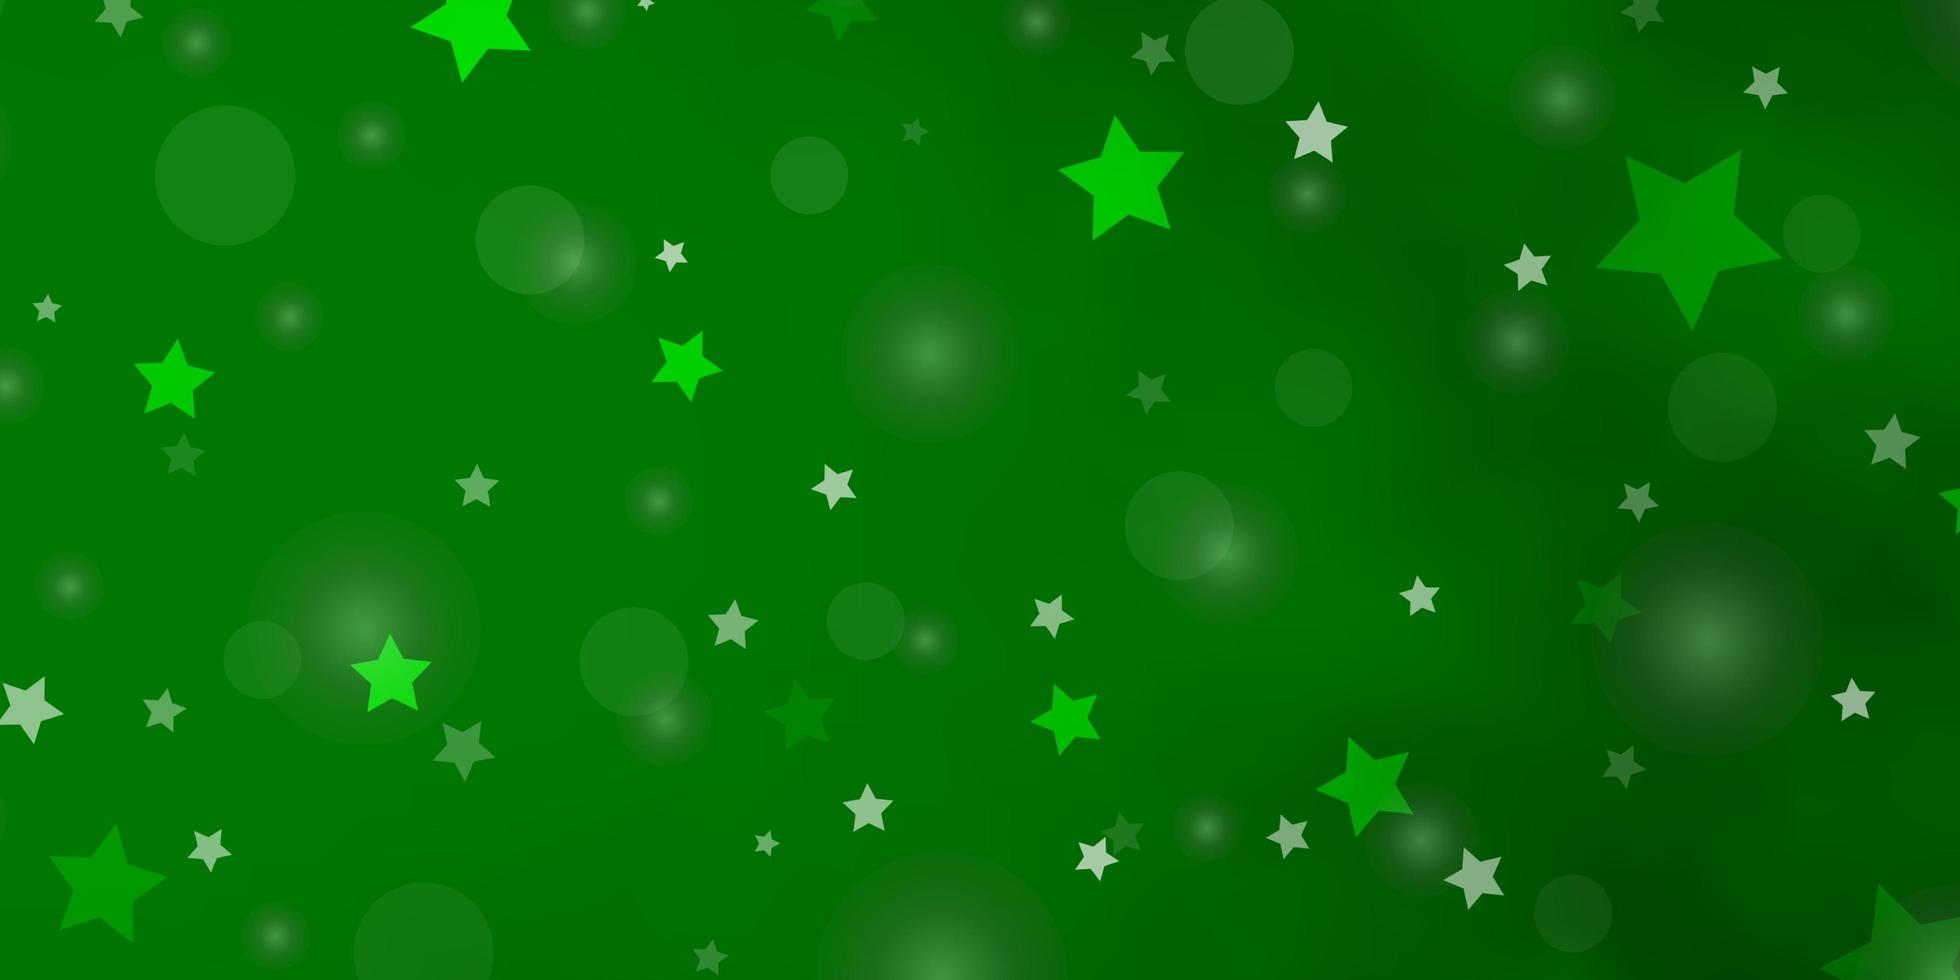 Light Green vector texture with circles, stars.